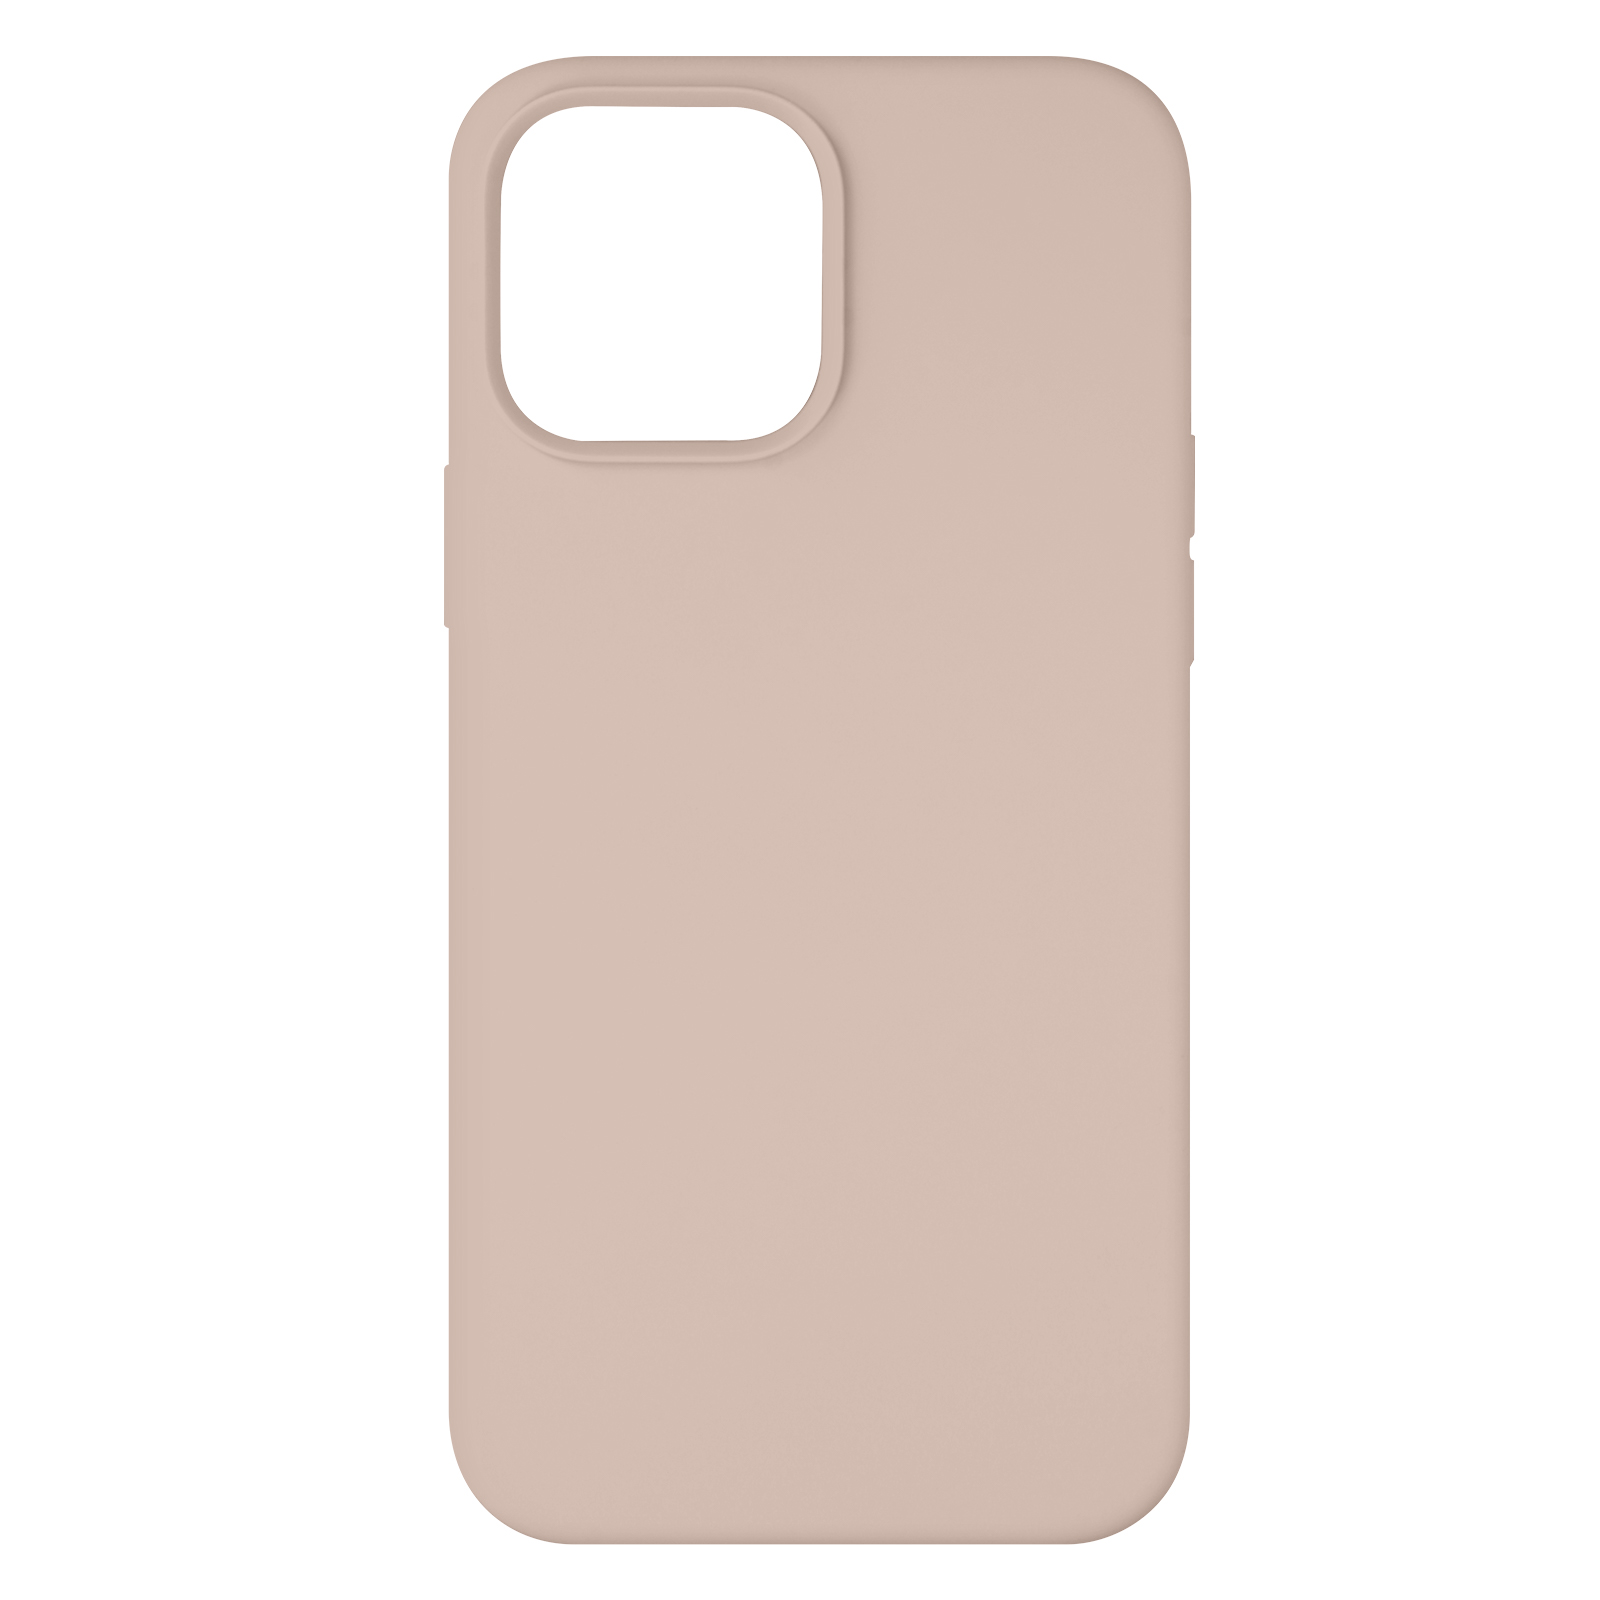 AVIZAR Fast Pro Series, iPhone Backcover, Rosa Apple, 13 Max